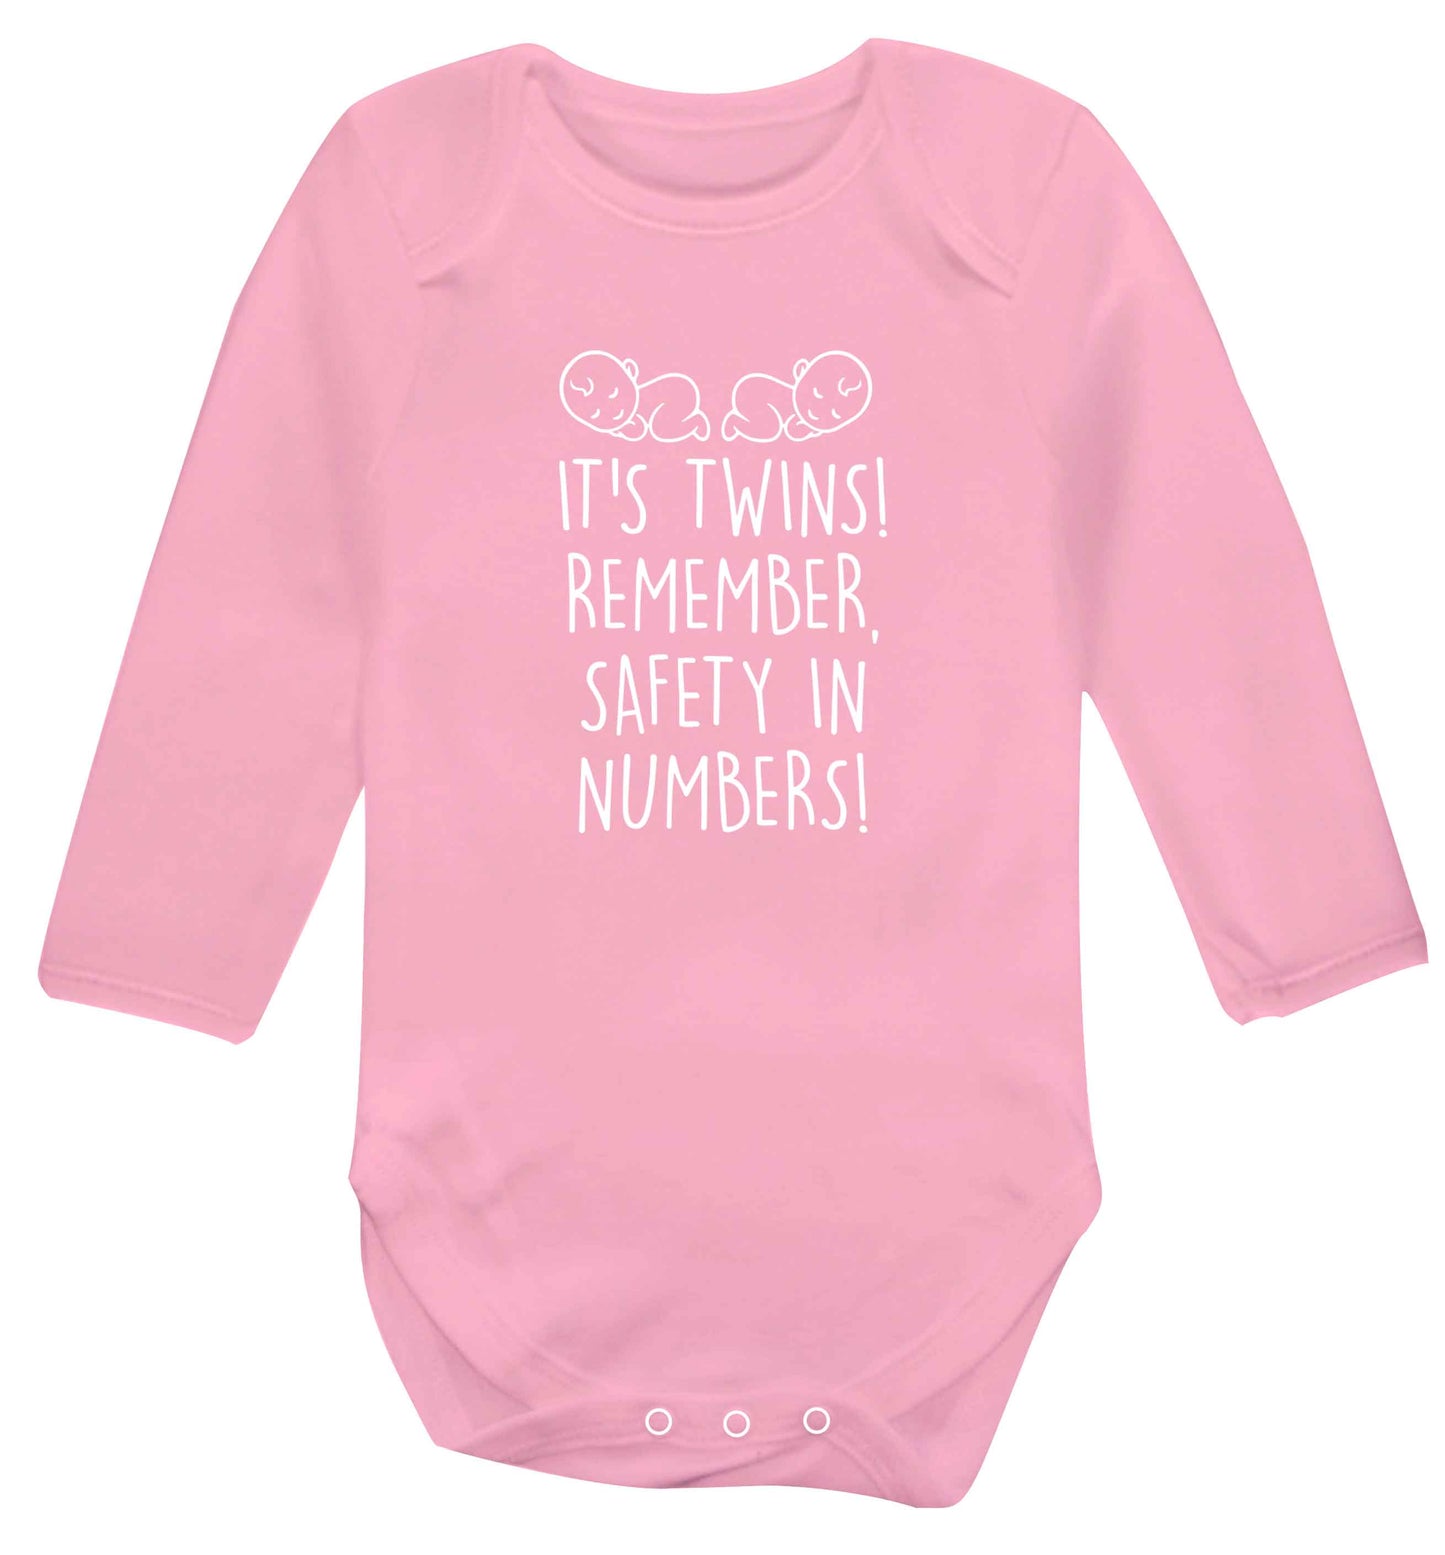 It's twins! Remember safety in numbers! baby vest long sleeved pale pink 6-12 months